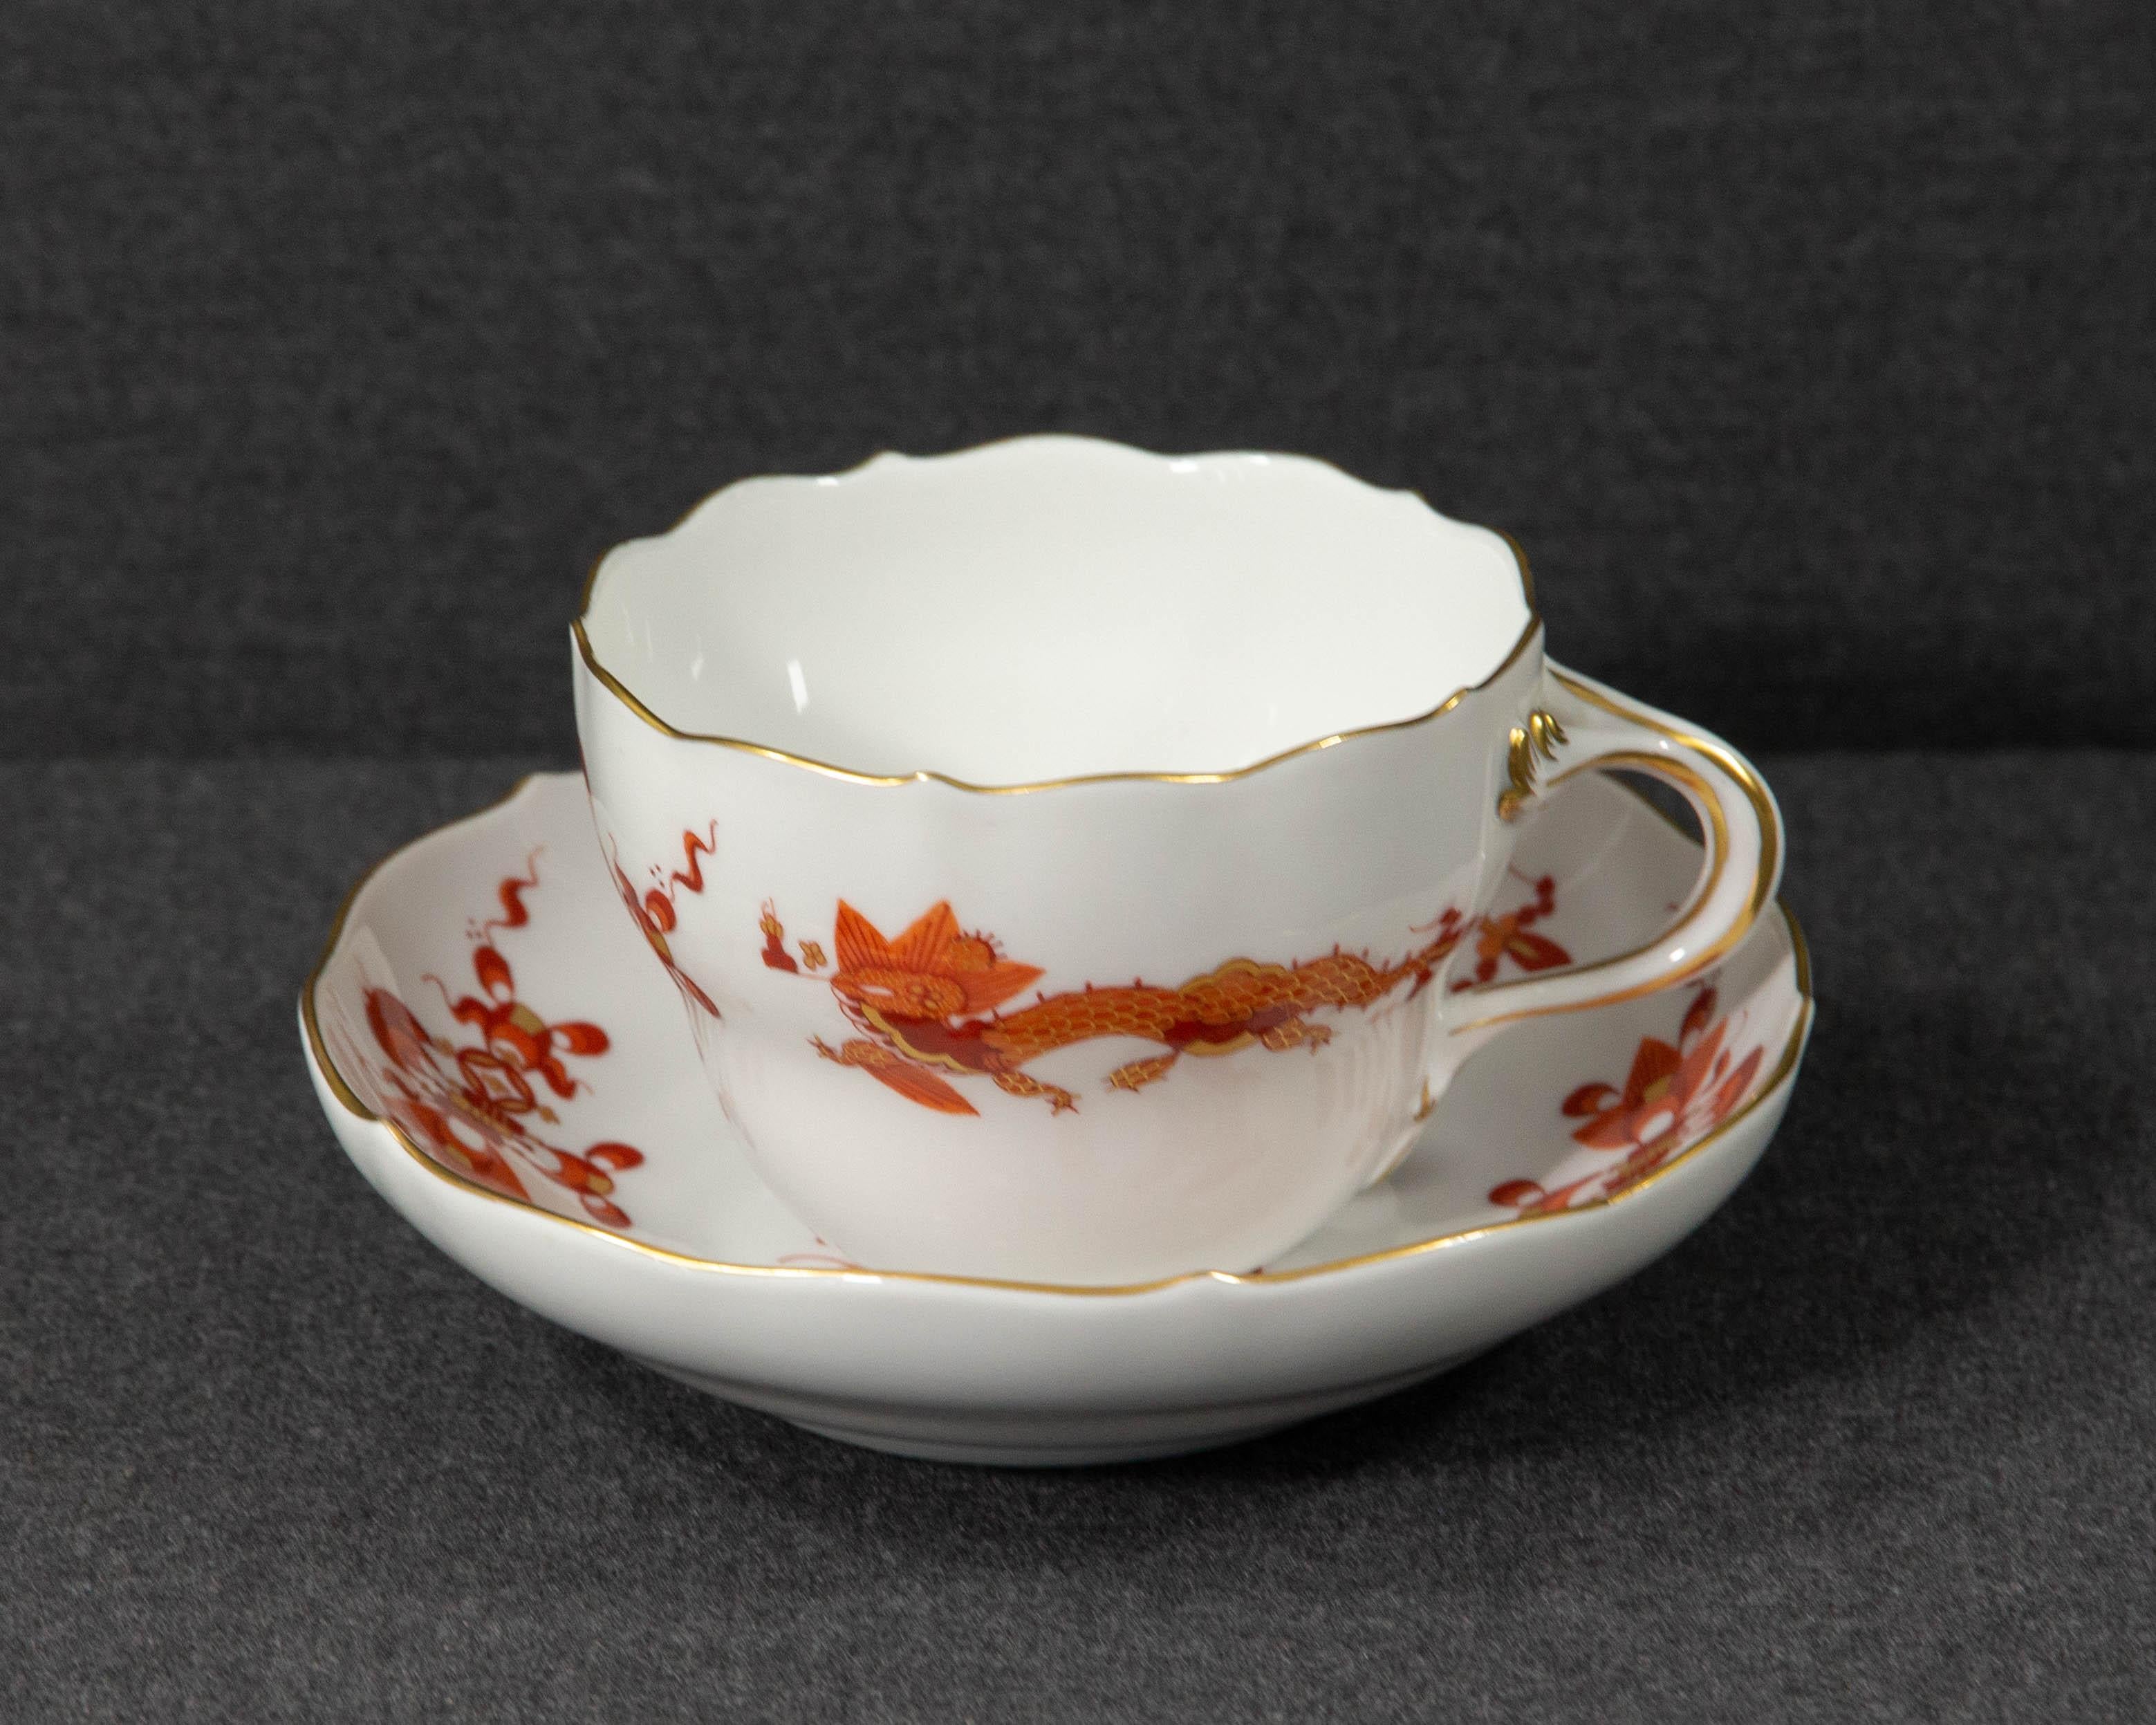 A Meissen red dragon teacup.

The teacup and saucer were made by Meissen and have been decorated with the 'Court Dragon' pattern in red. The items were made in the second half of the 20th century.

The item is made of white porcelain and is hand